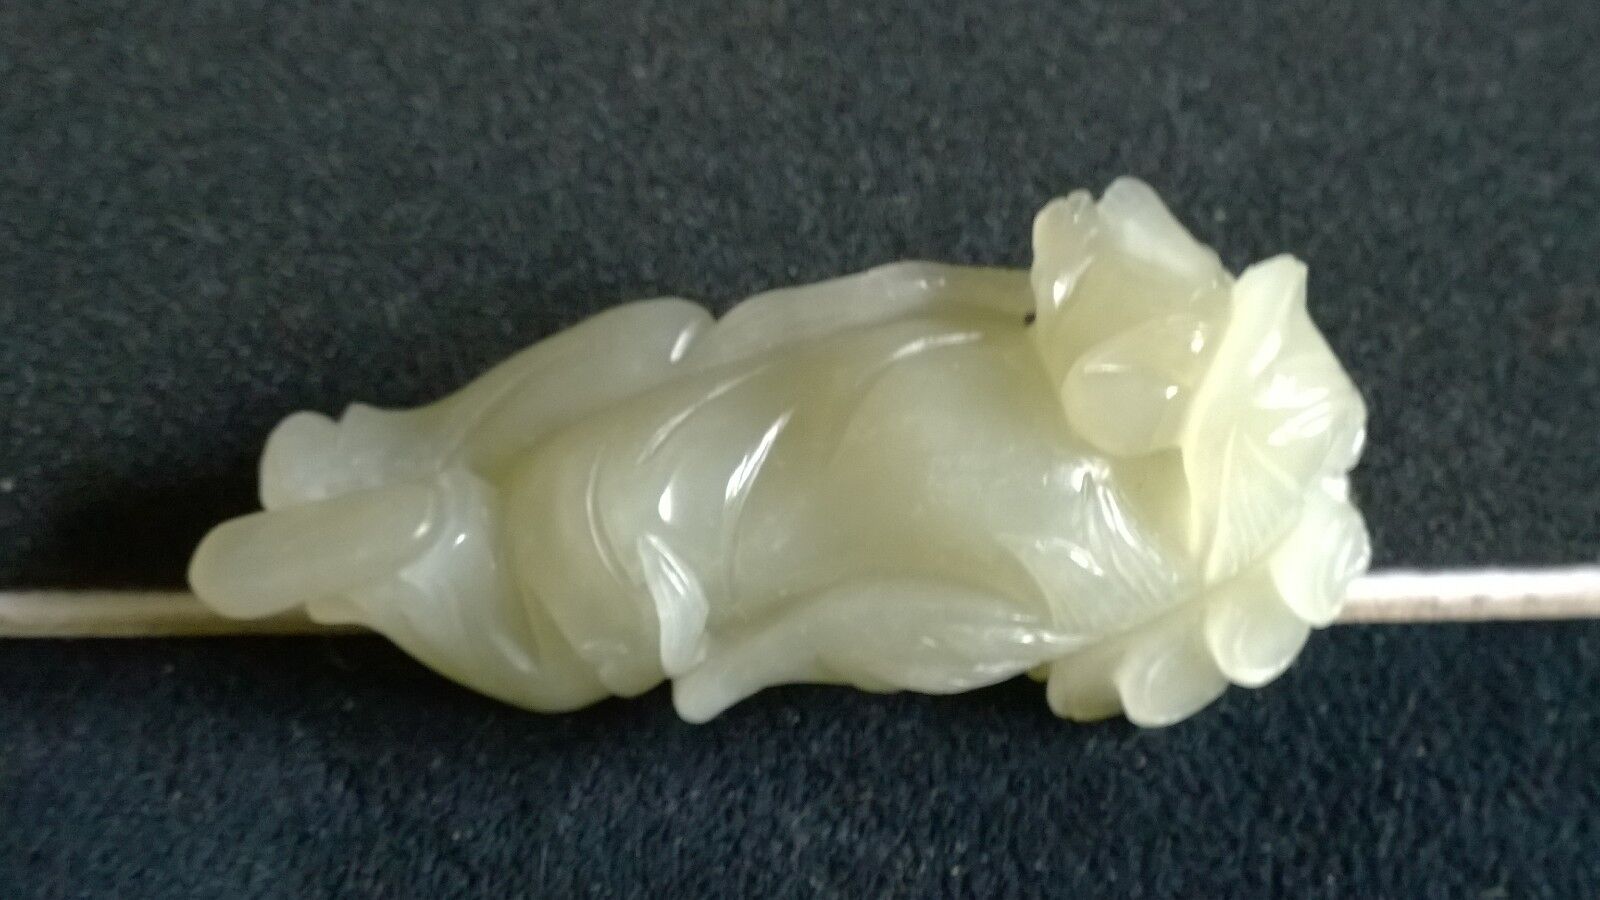 Group of Two (2)Nephrite Jade Lucky Wealth Babies w/Coins and Fruits Amulets. Без бренда - фотография #4